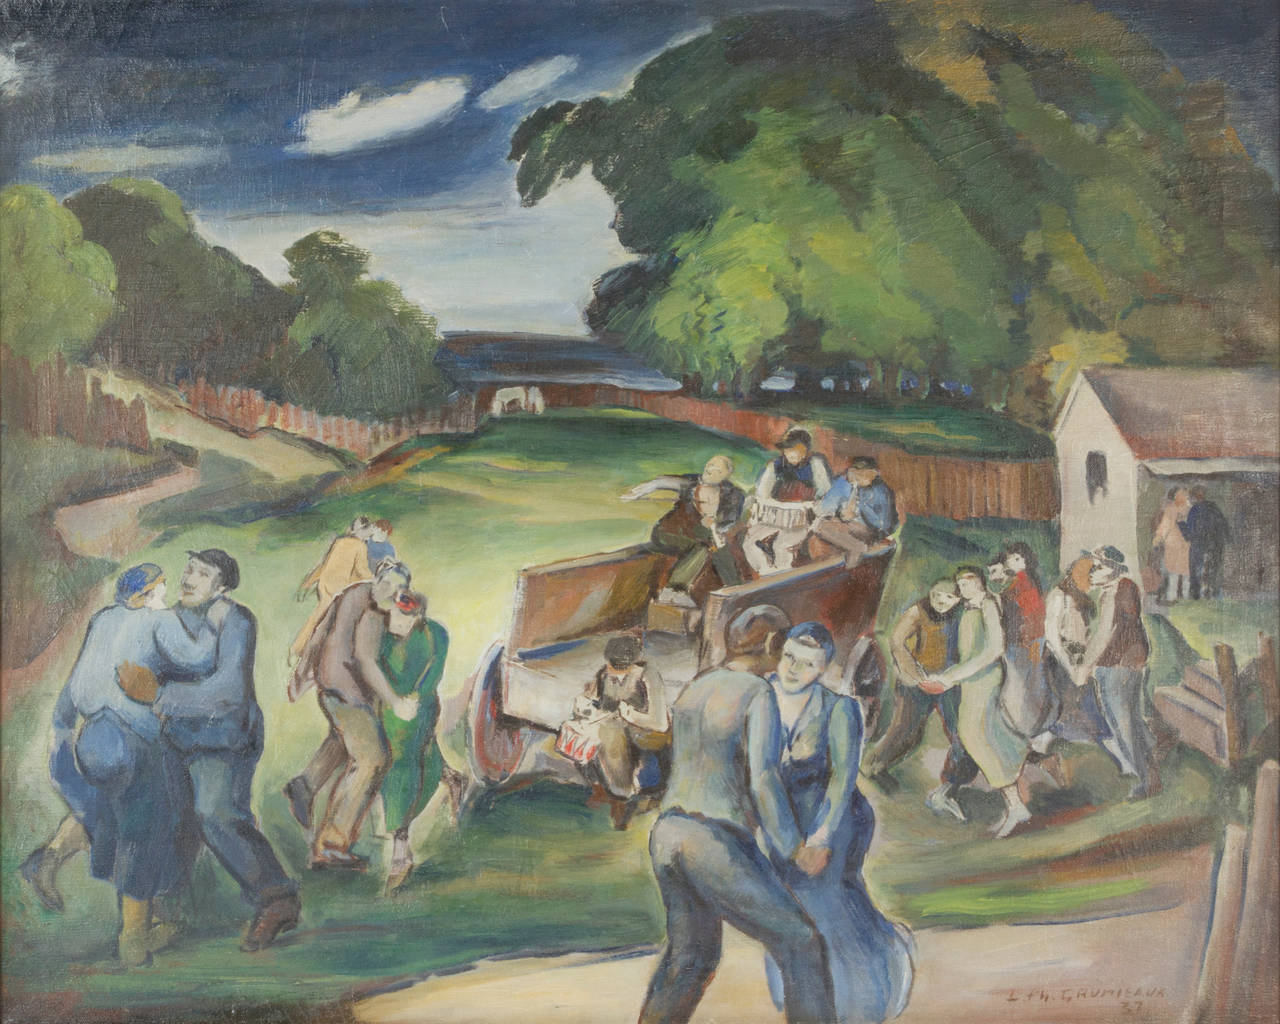 Beautifully painted, depicting a slice of life in a farm community.